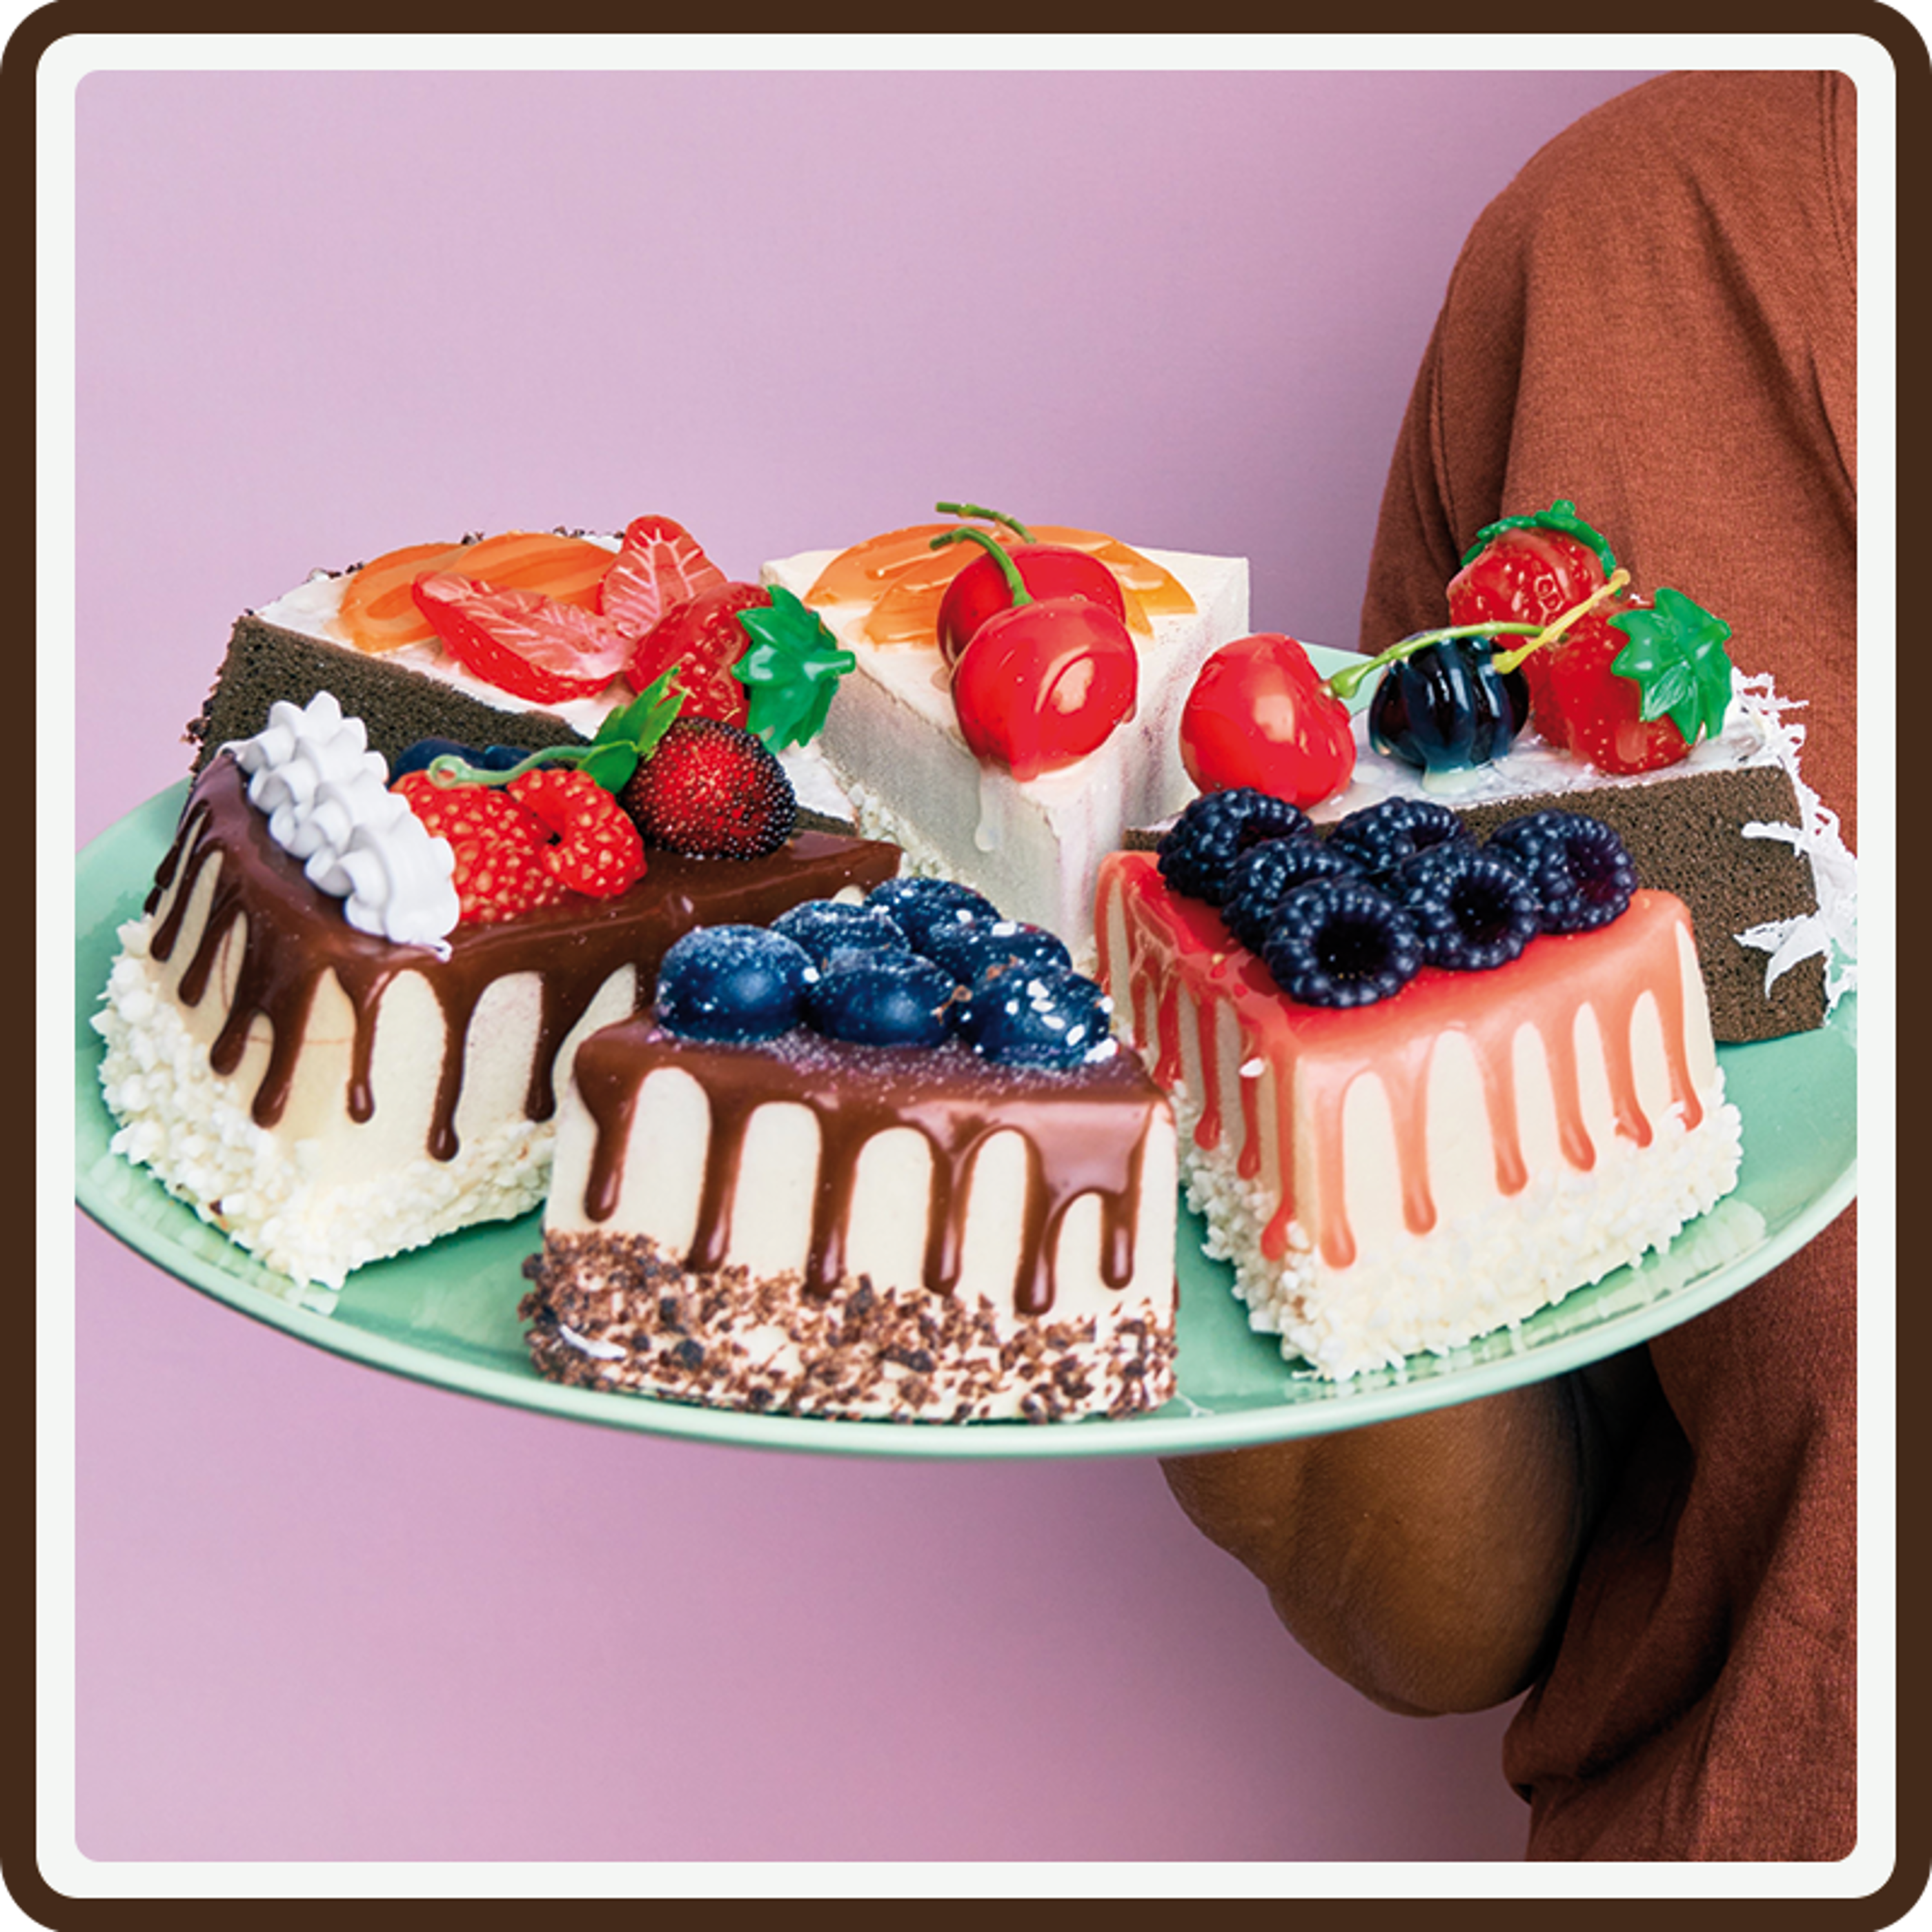 A blue plate with a variety of decorated cake slices with a pink backdrop